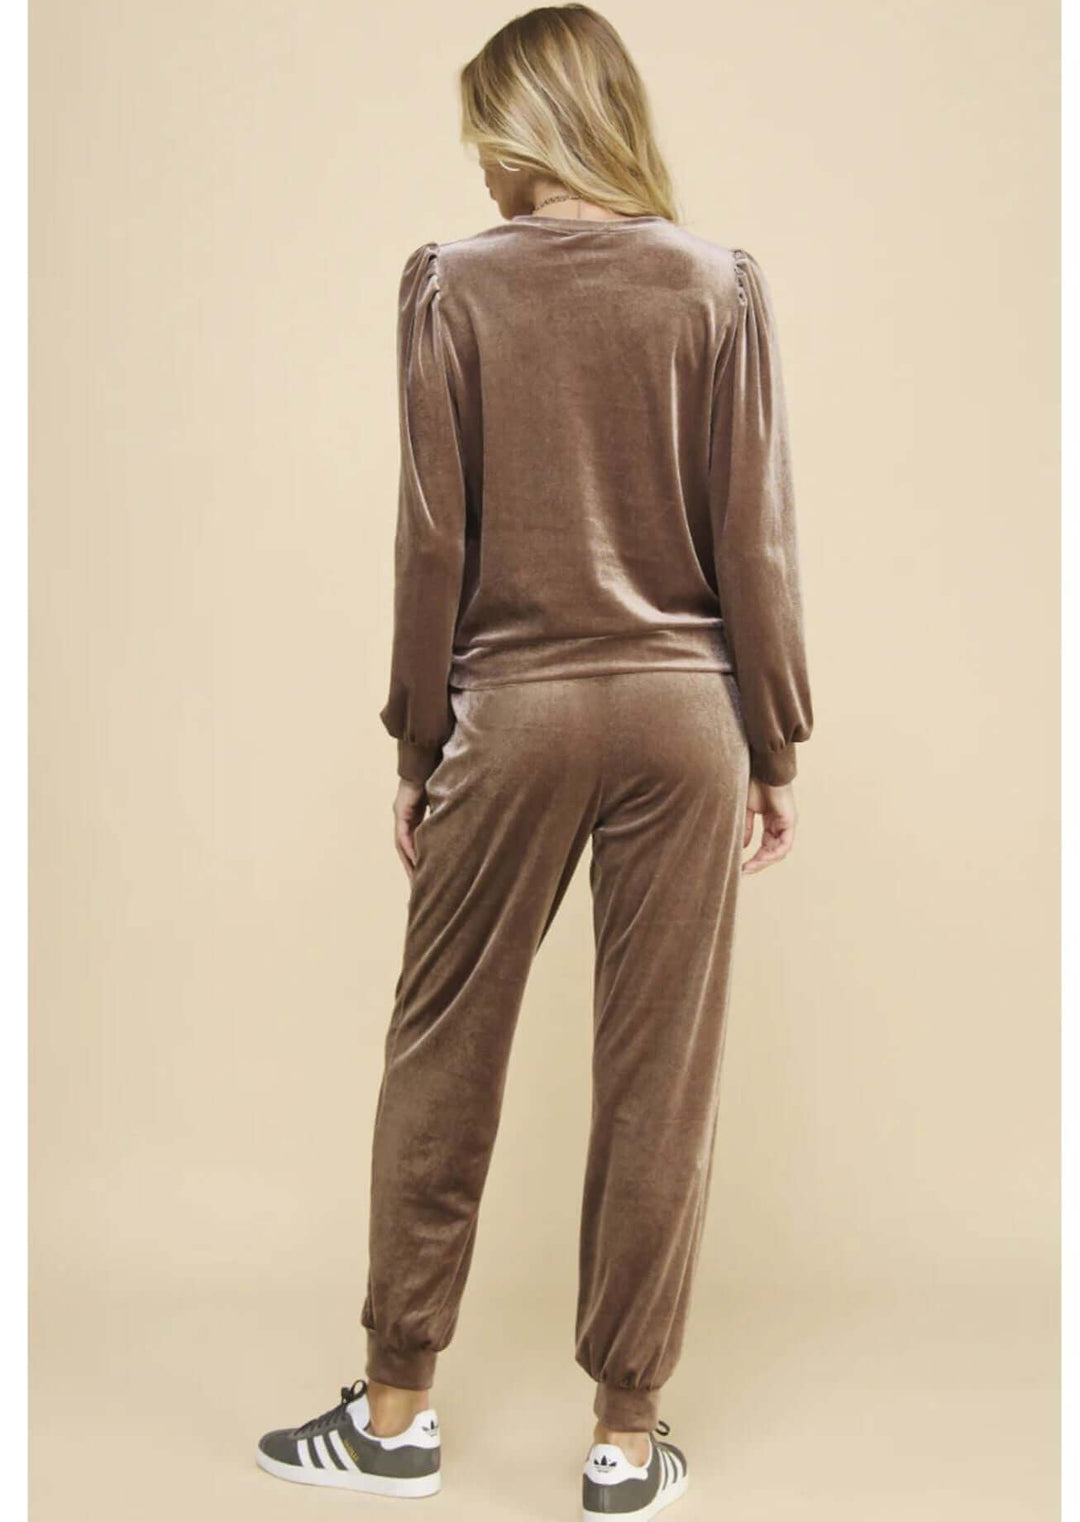 USA Made Women's Glam Velour Relaxed Fit Track Suit with Puff Sleeves in Taupe | Classy Cozy Cool Women's Made in USA Boutique